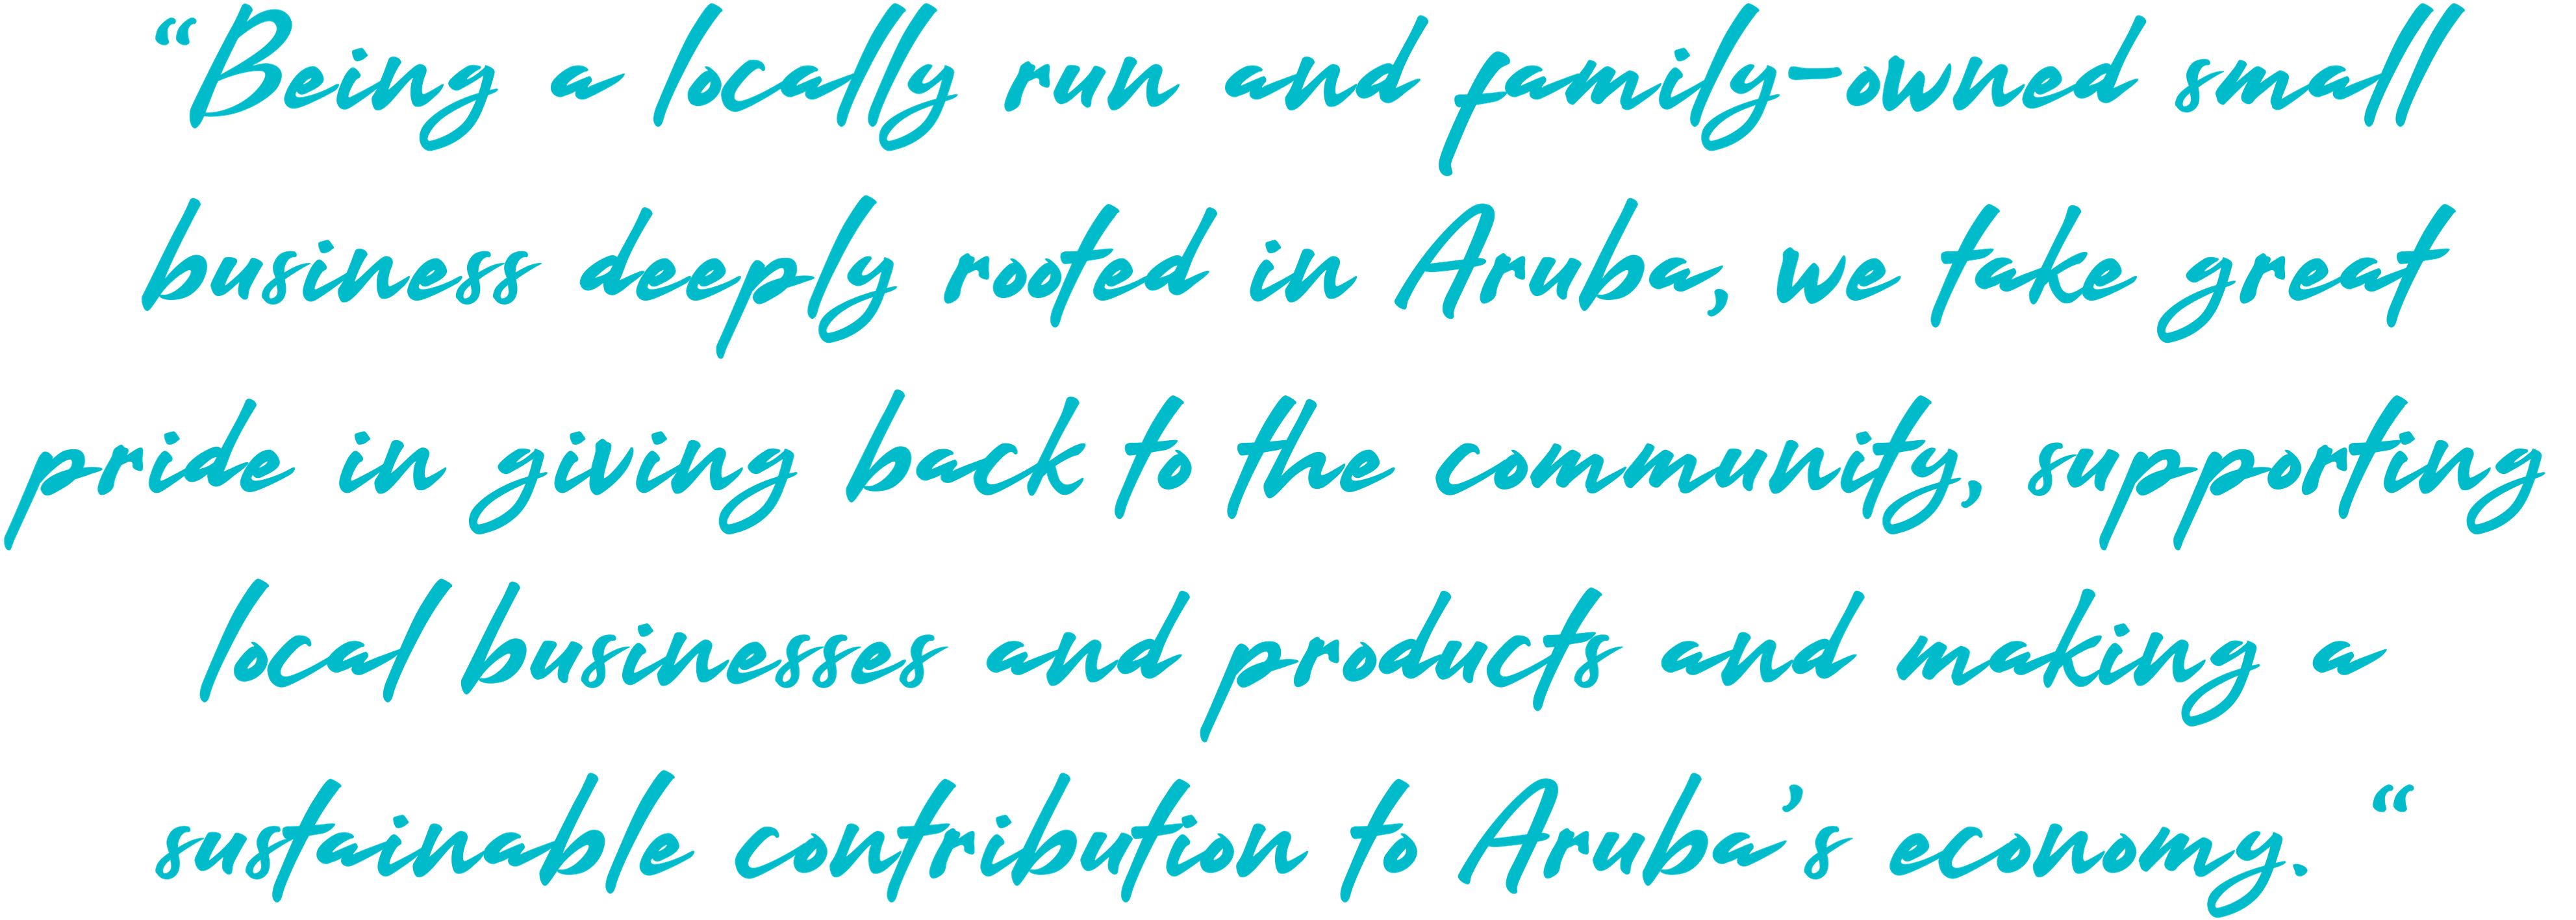 “Being a locally run and family-owned small business deeply rooted in Aruba, we take great pride in giving back to the community, supporting local businesses and products and making a sustainable contribution to Aruba’s economy. “